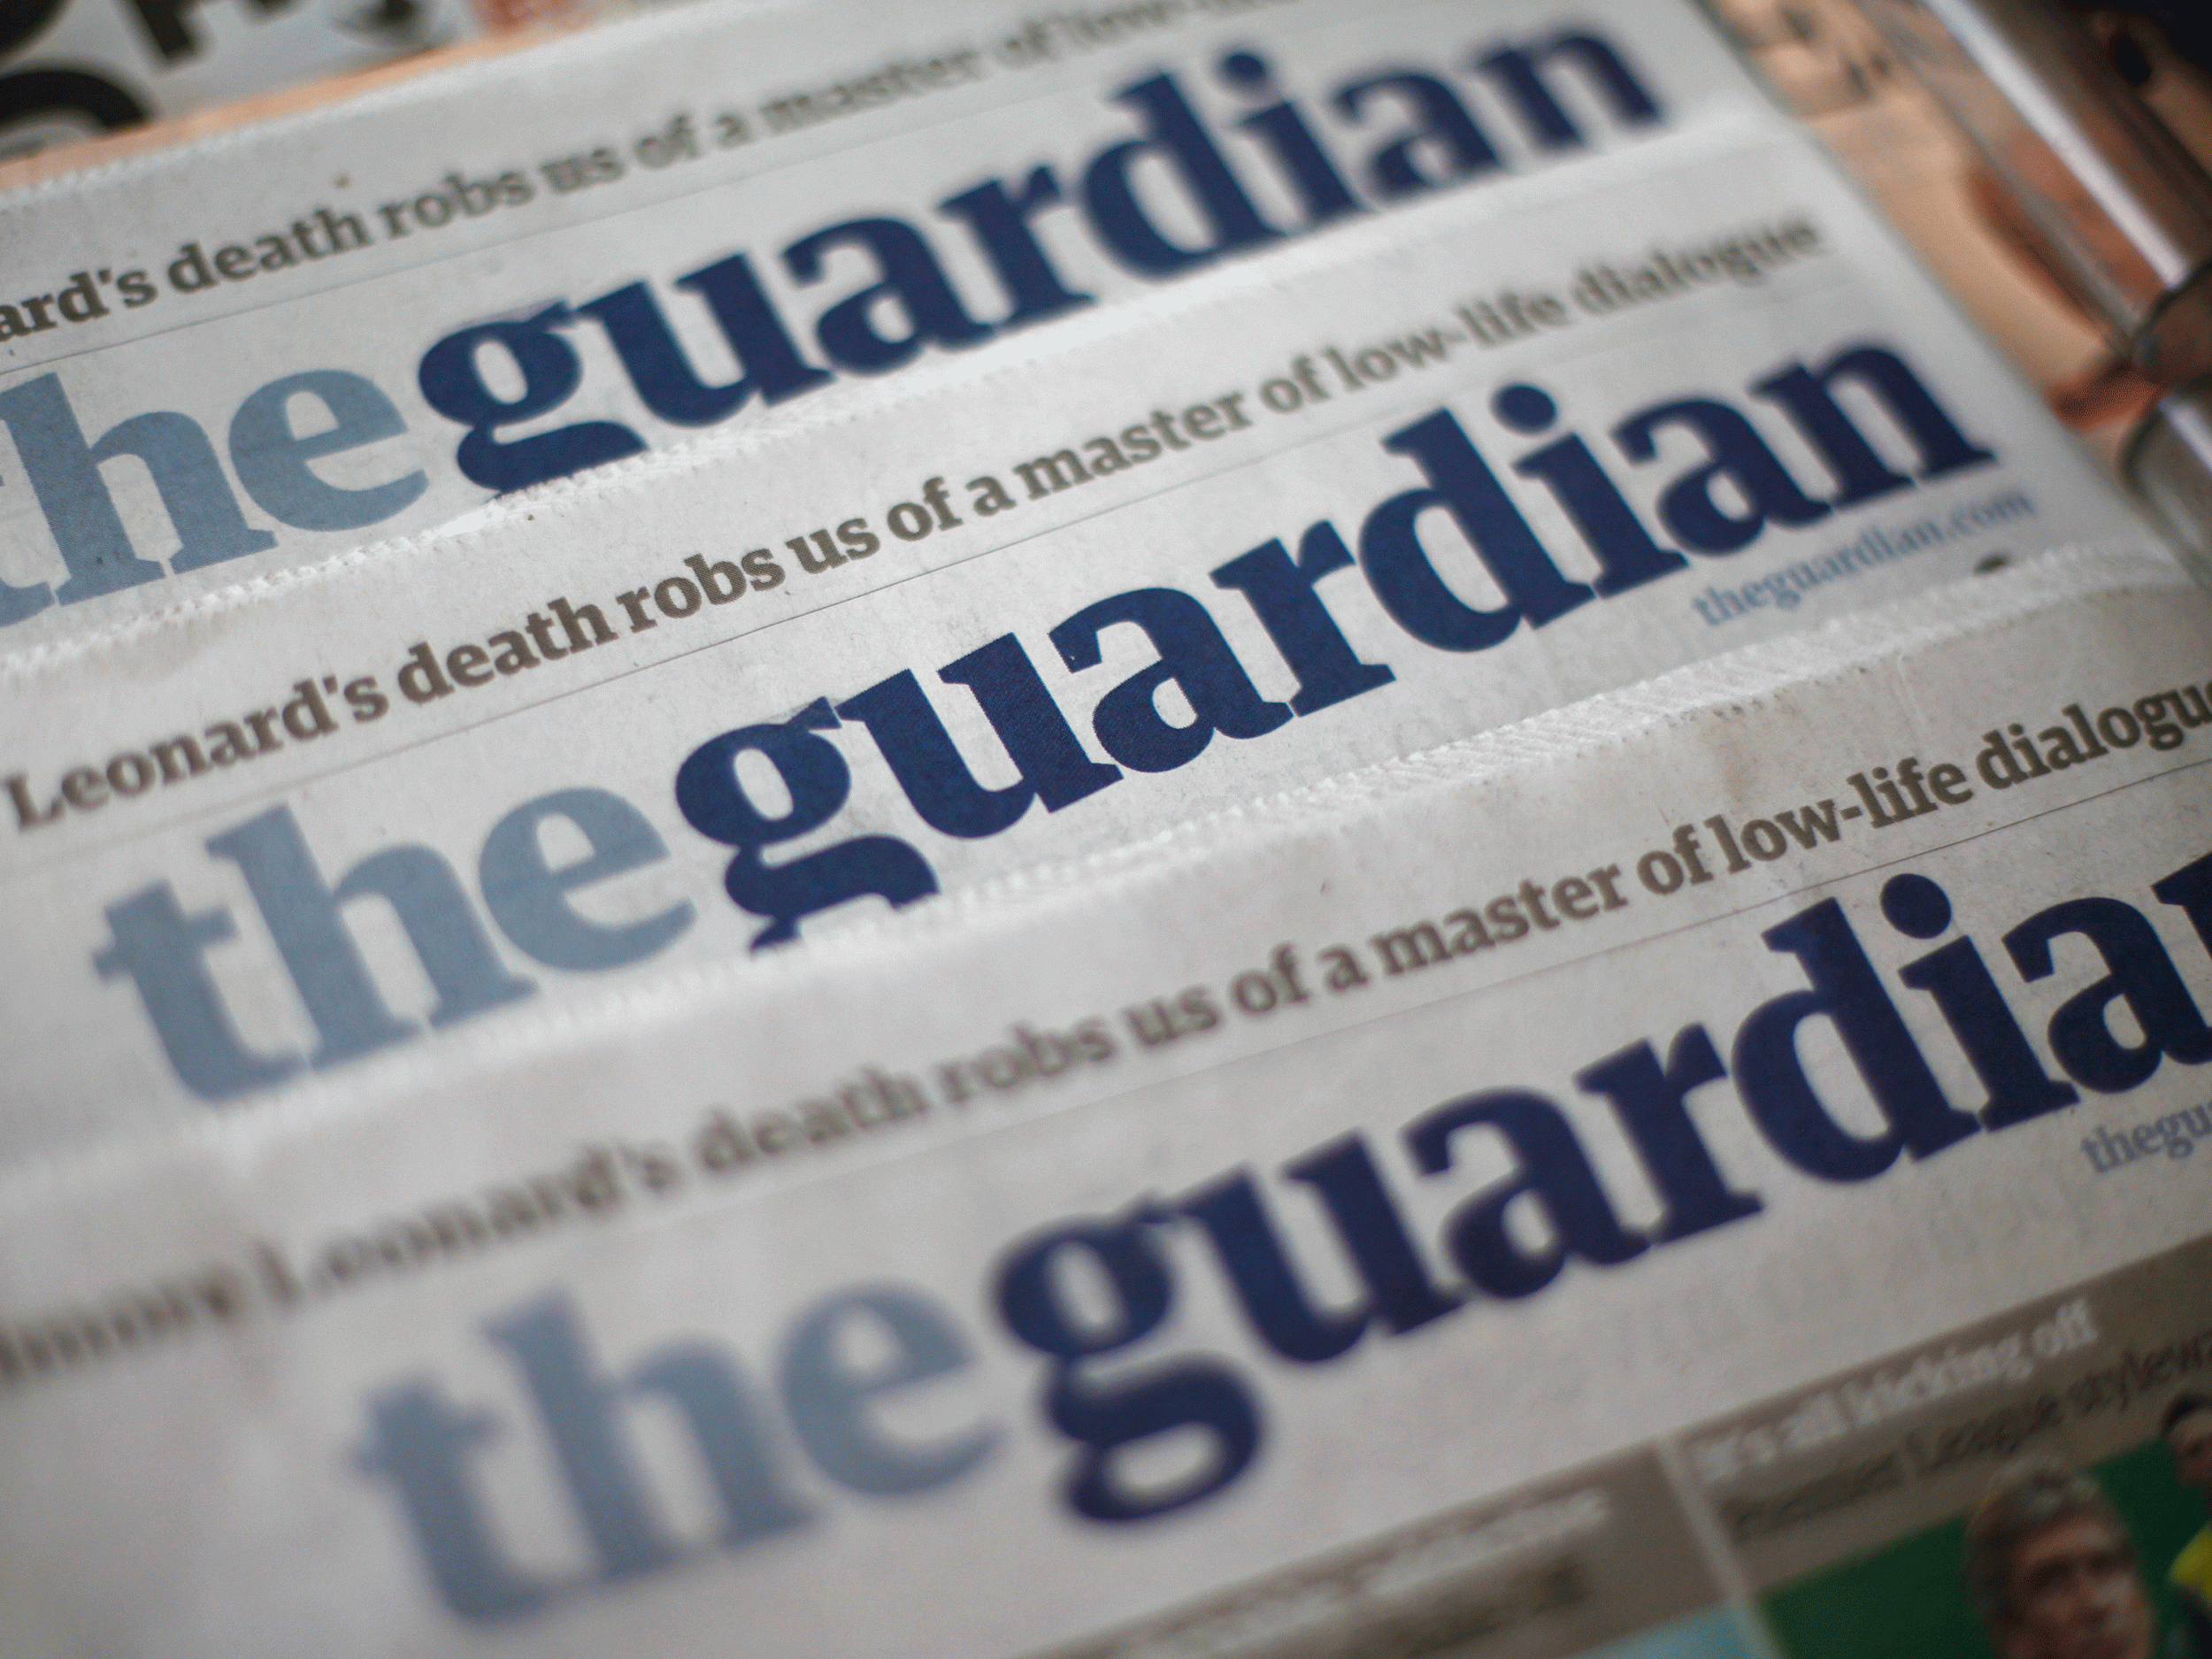 GMG is owned by The Scott Trust, created in 1936 to safeguard its flagship newspaper